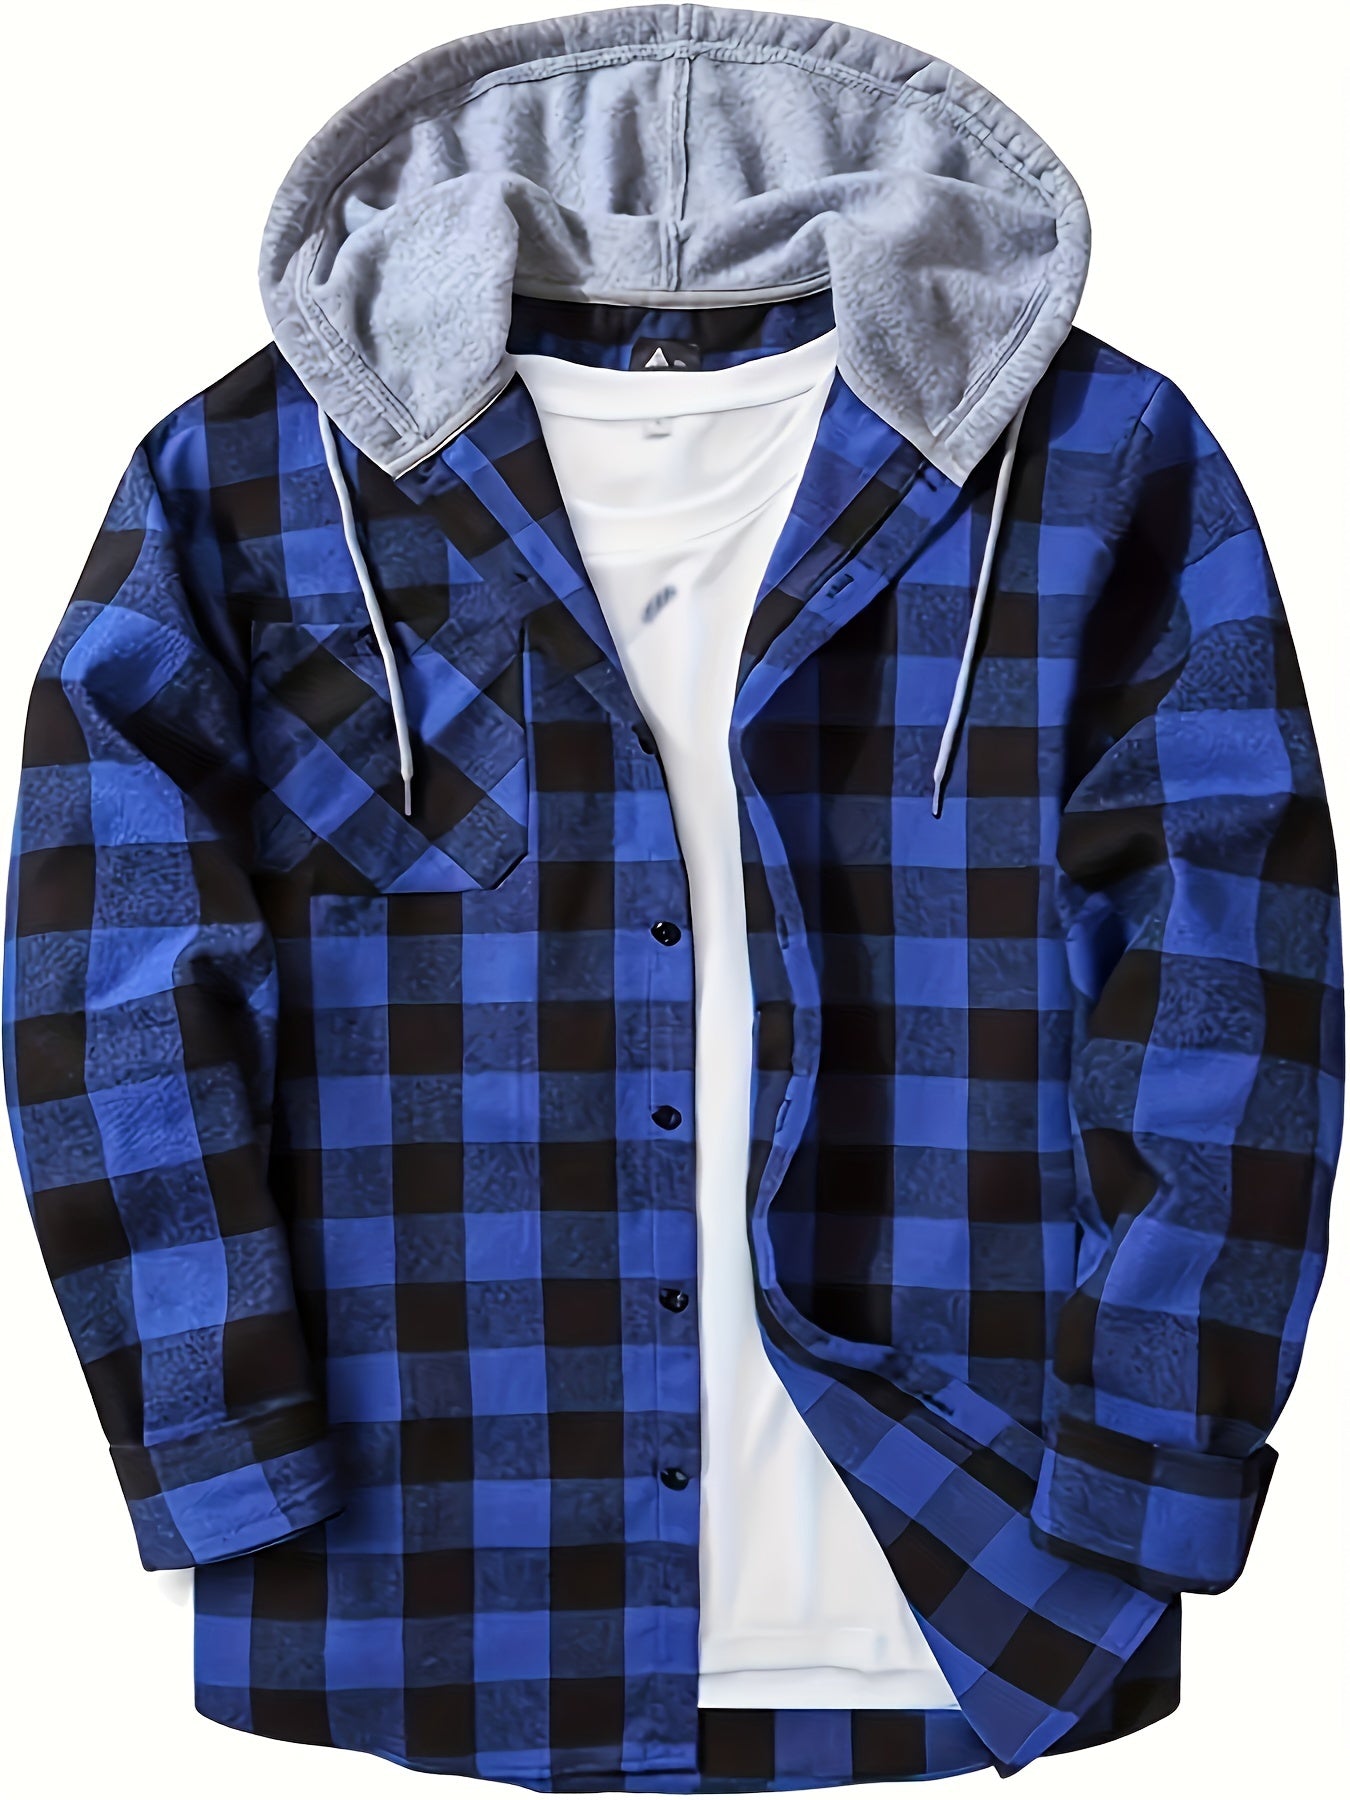 Plaid Pattern Men's Long Sleeve Hooded Shirt With Chest Pocket & Drawstring, Men's Casual Spring Fall Clothing